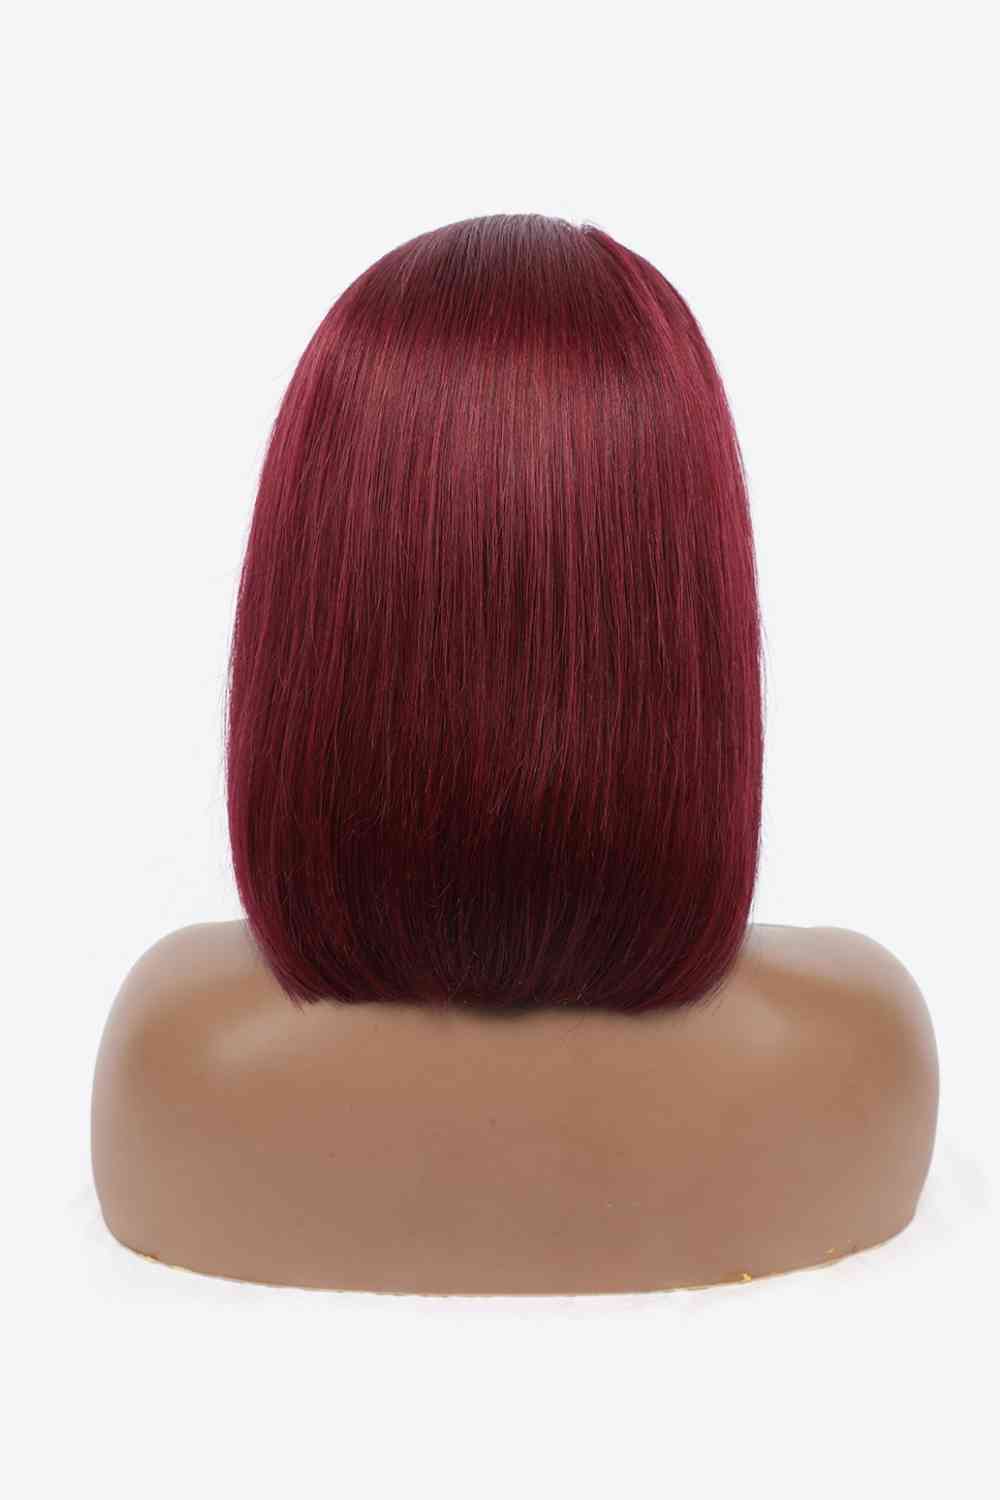 Wine 12" 155g Lace Front Wigs Human Hair 150% Density